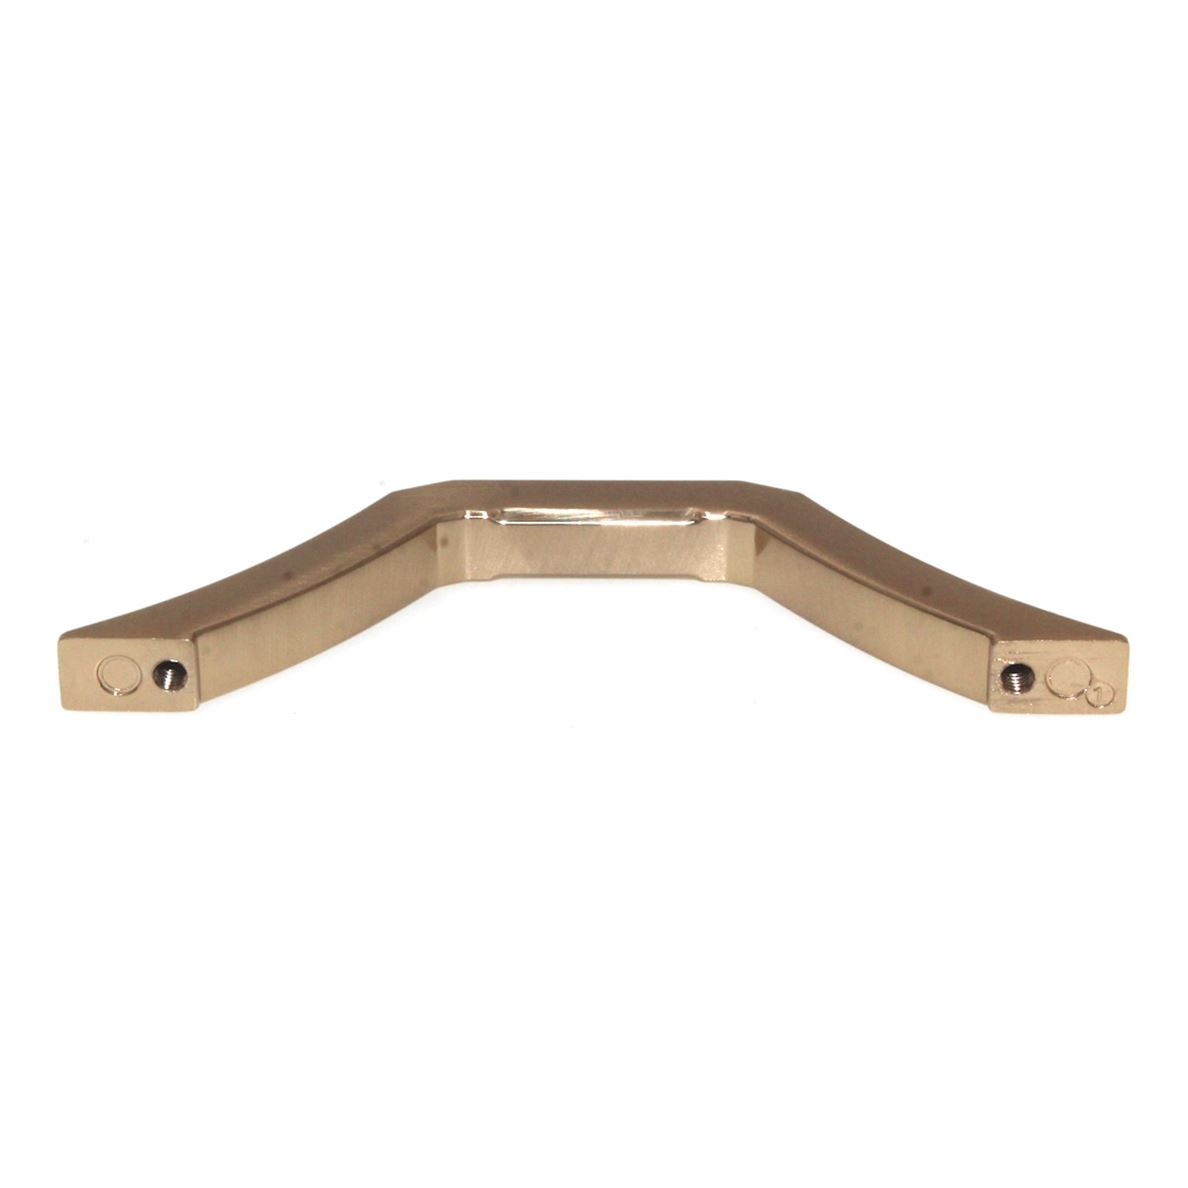 Pride Milan Square Cabinet Arch Pull 3 3/4" (96mm) Ctr Rose Gold P94096-RG